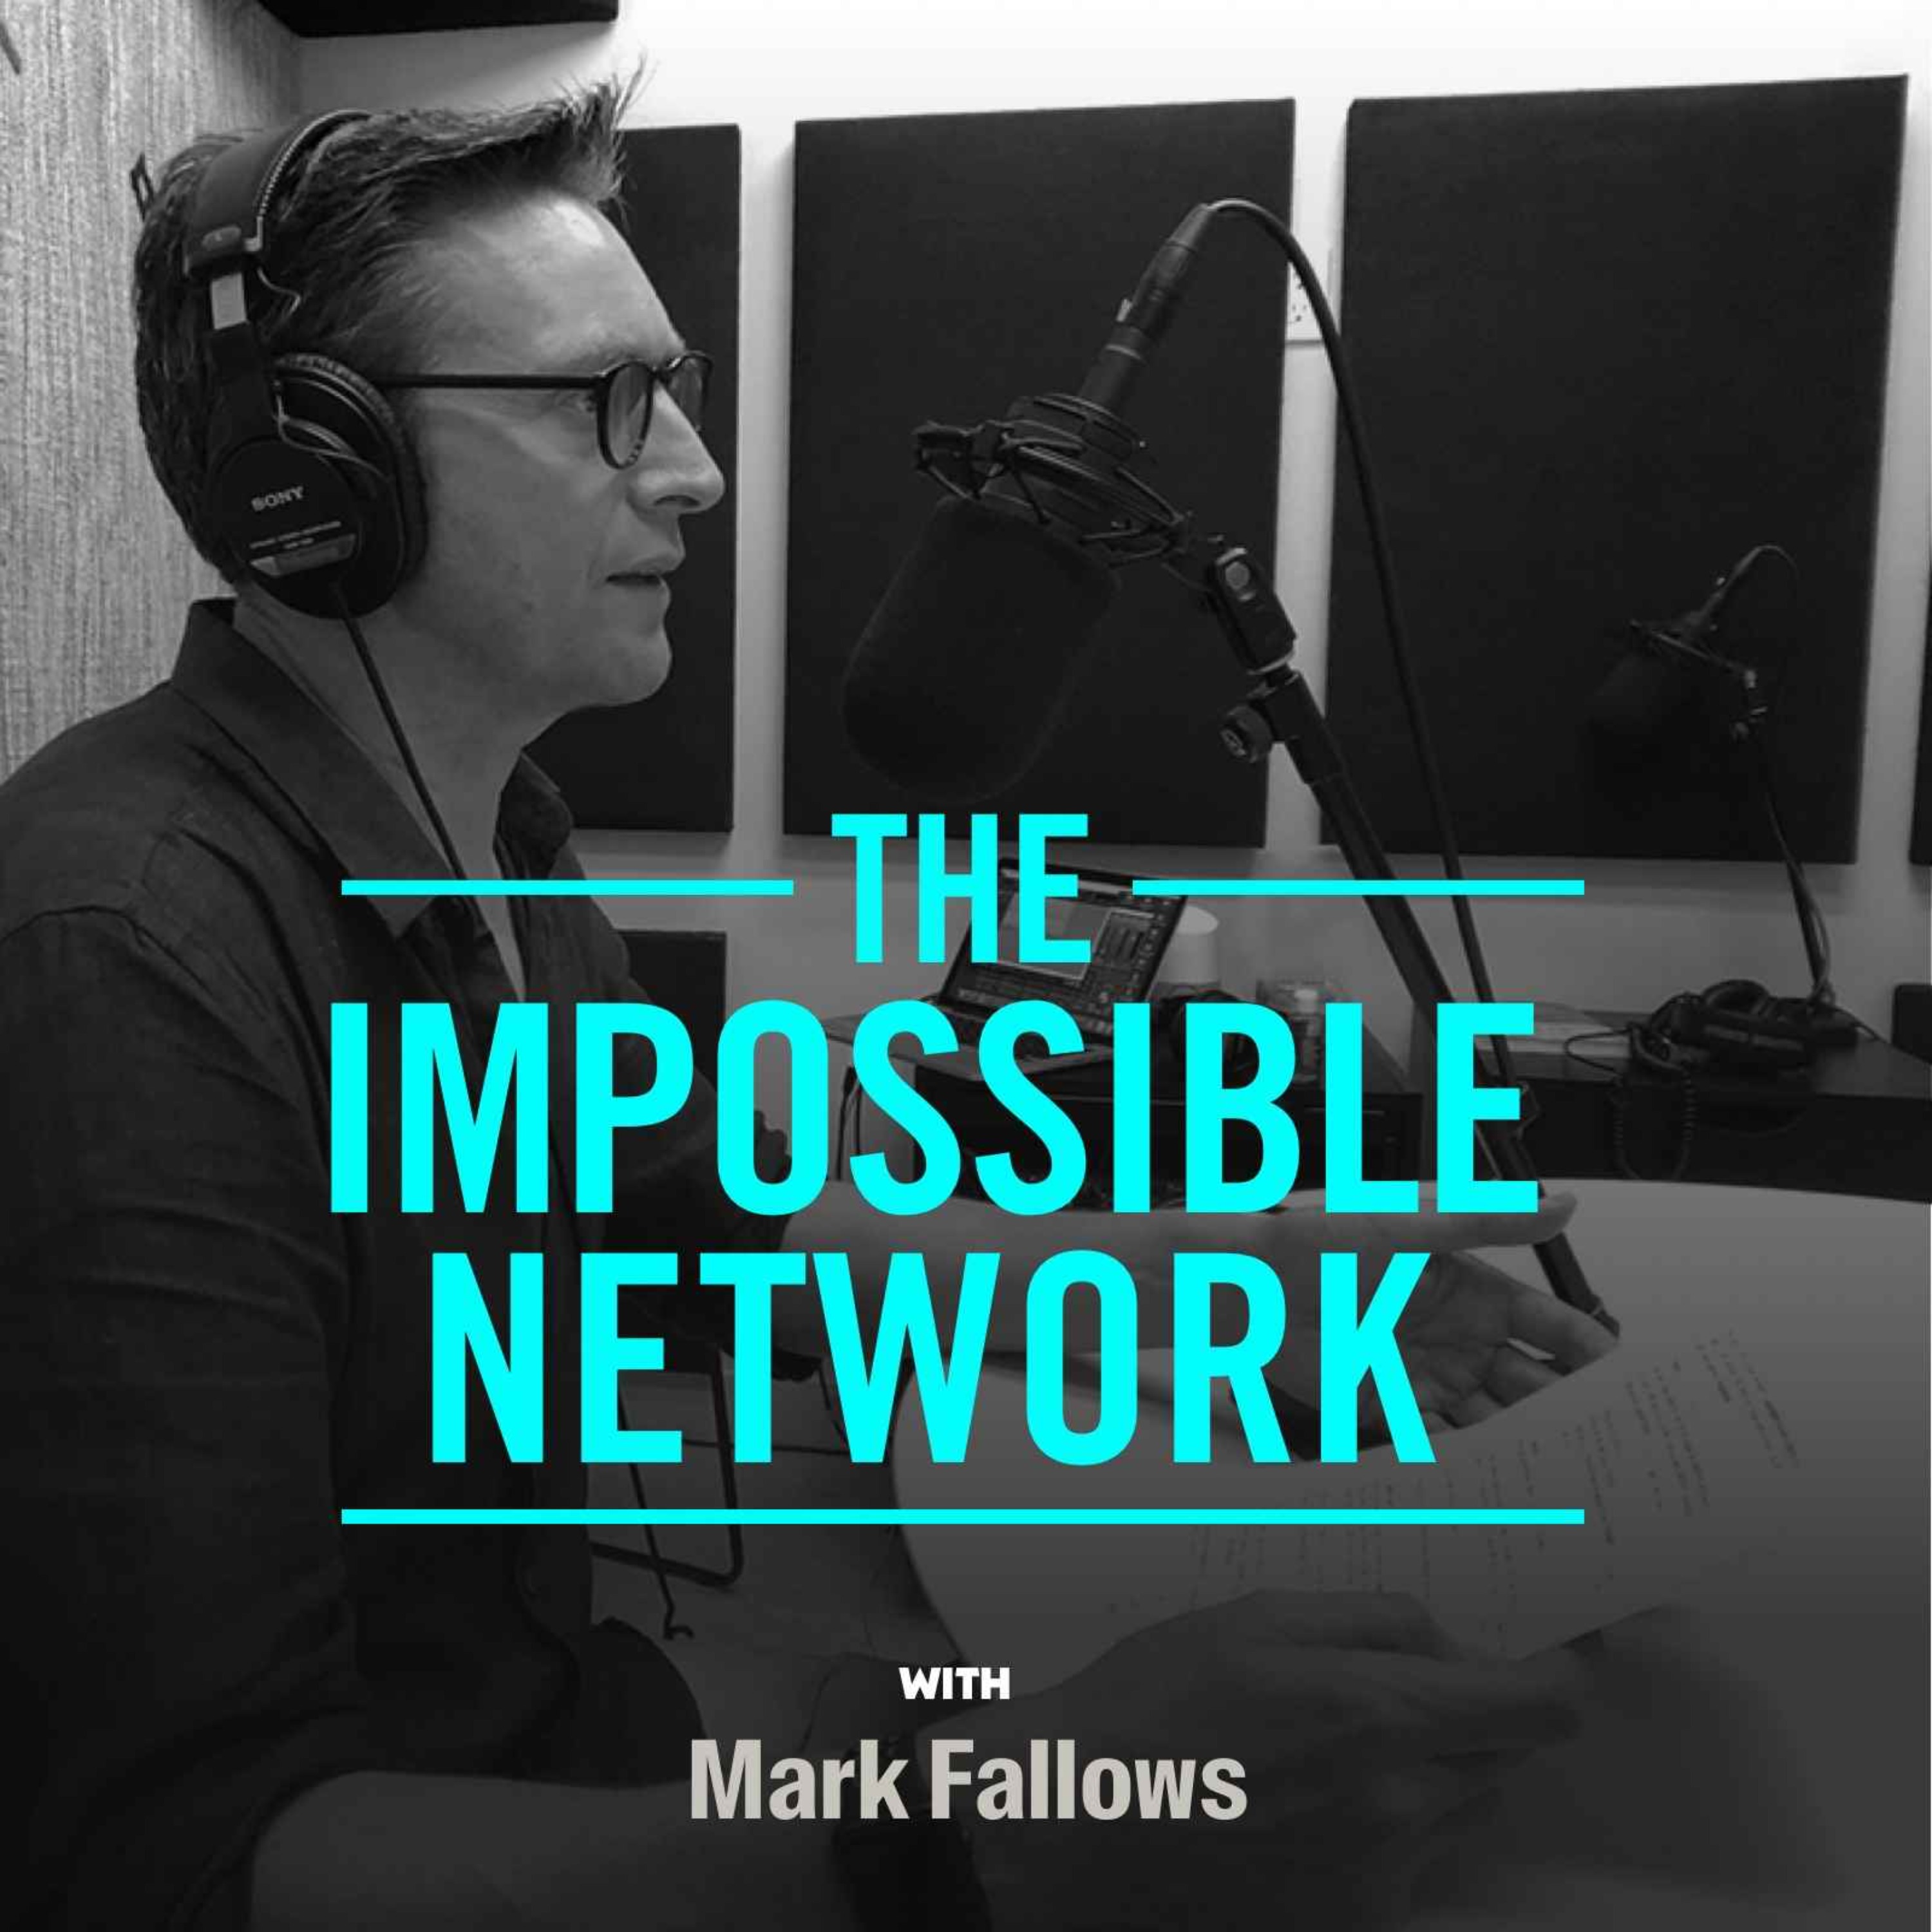 The Impossible Network